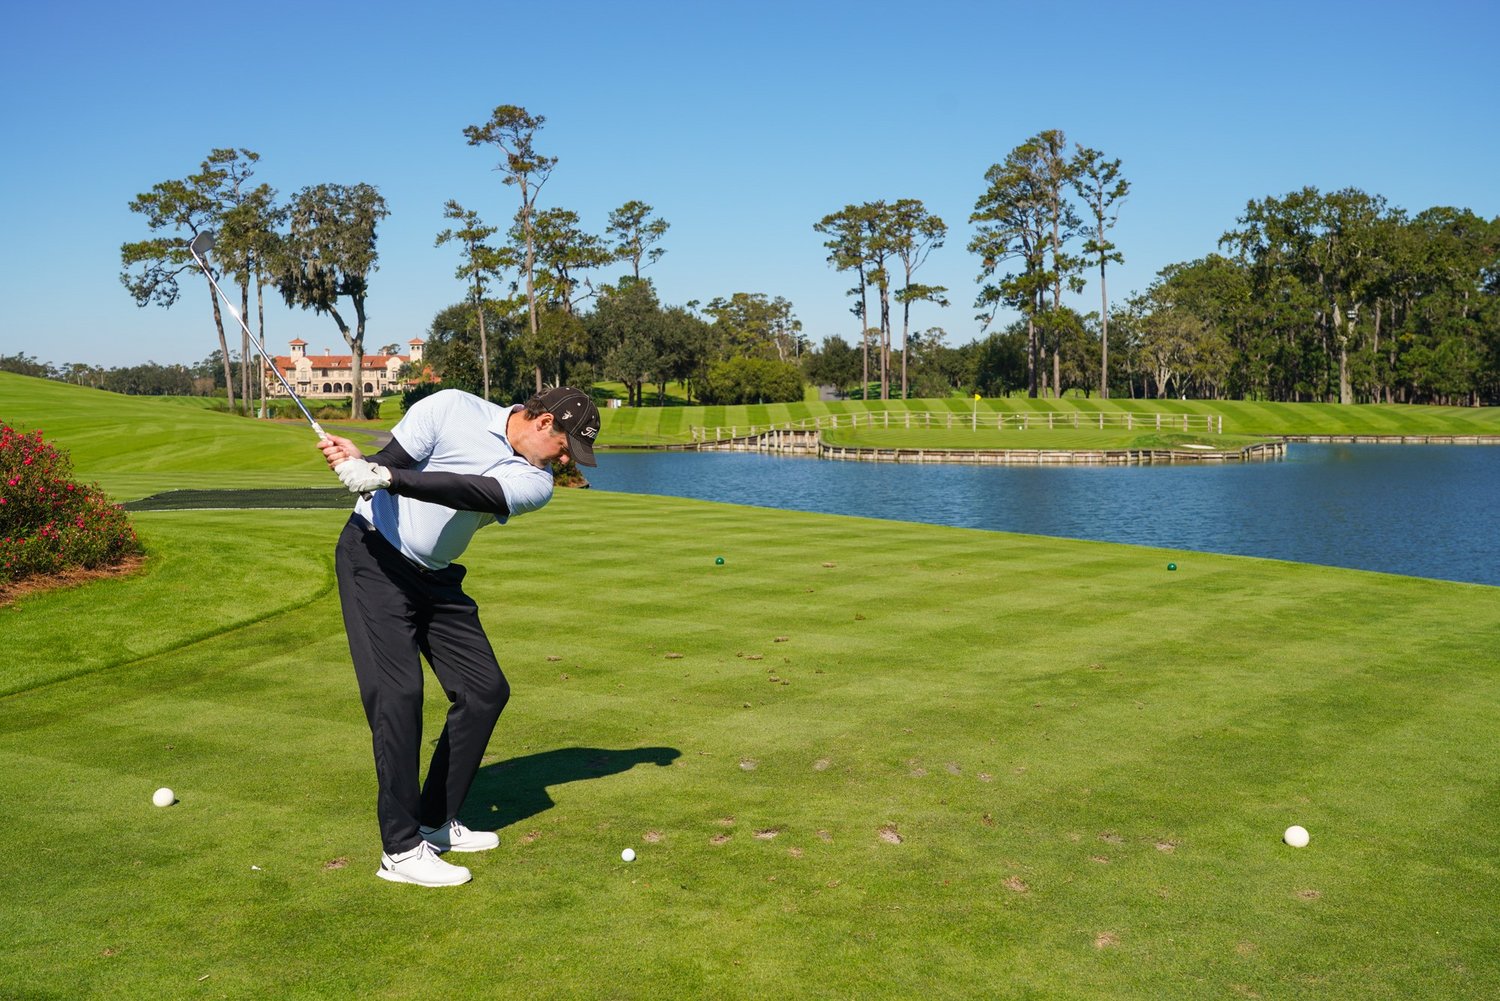 More than 100 golfers enjoyed the exclusive experience of playing THE PLAYERS Stadium Course at TPC Sawgrass during the 2nd Annual Great Futures Golf Classic on Nov. 18.